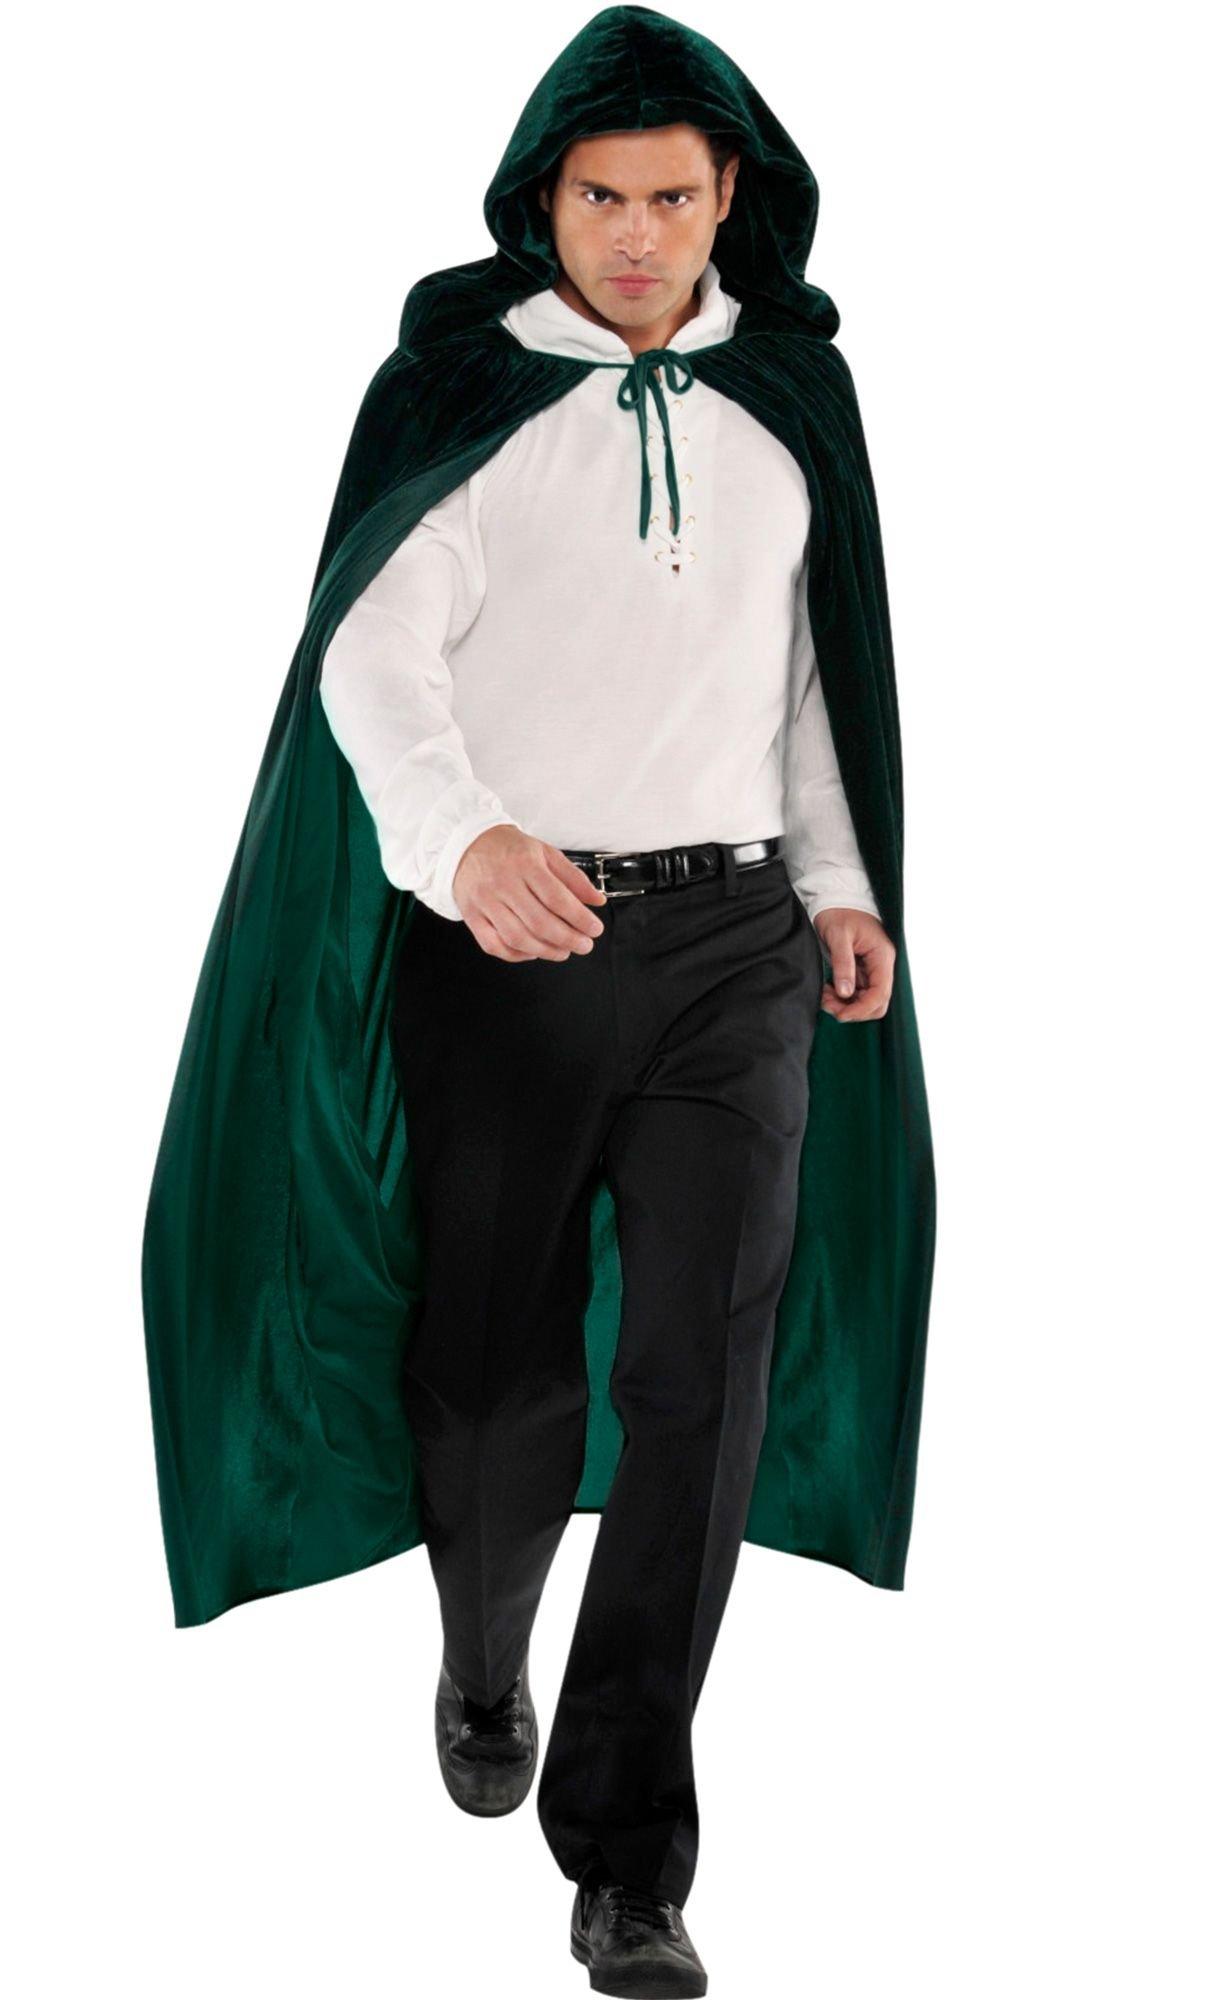 Adult Forest Green Hooded Cape